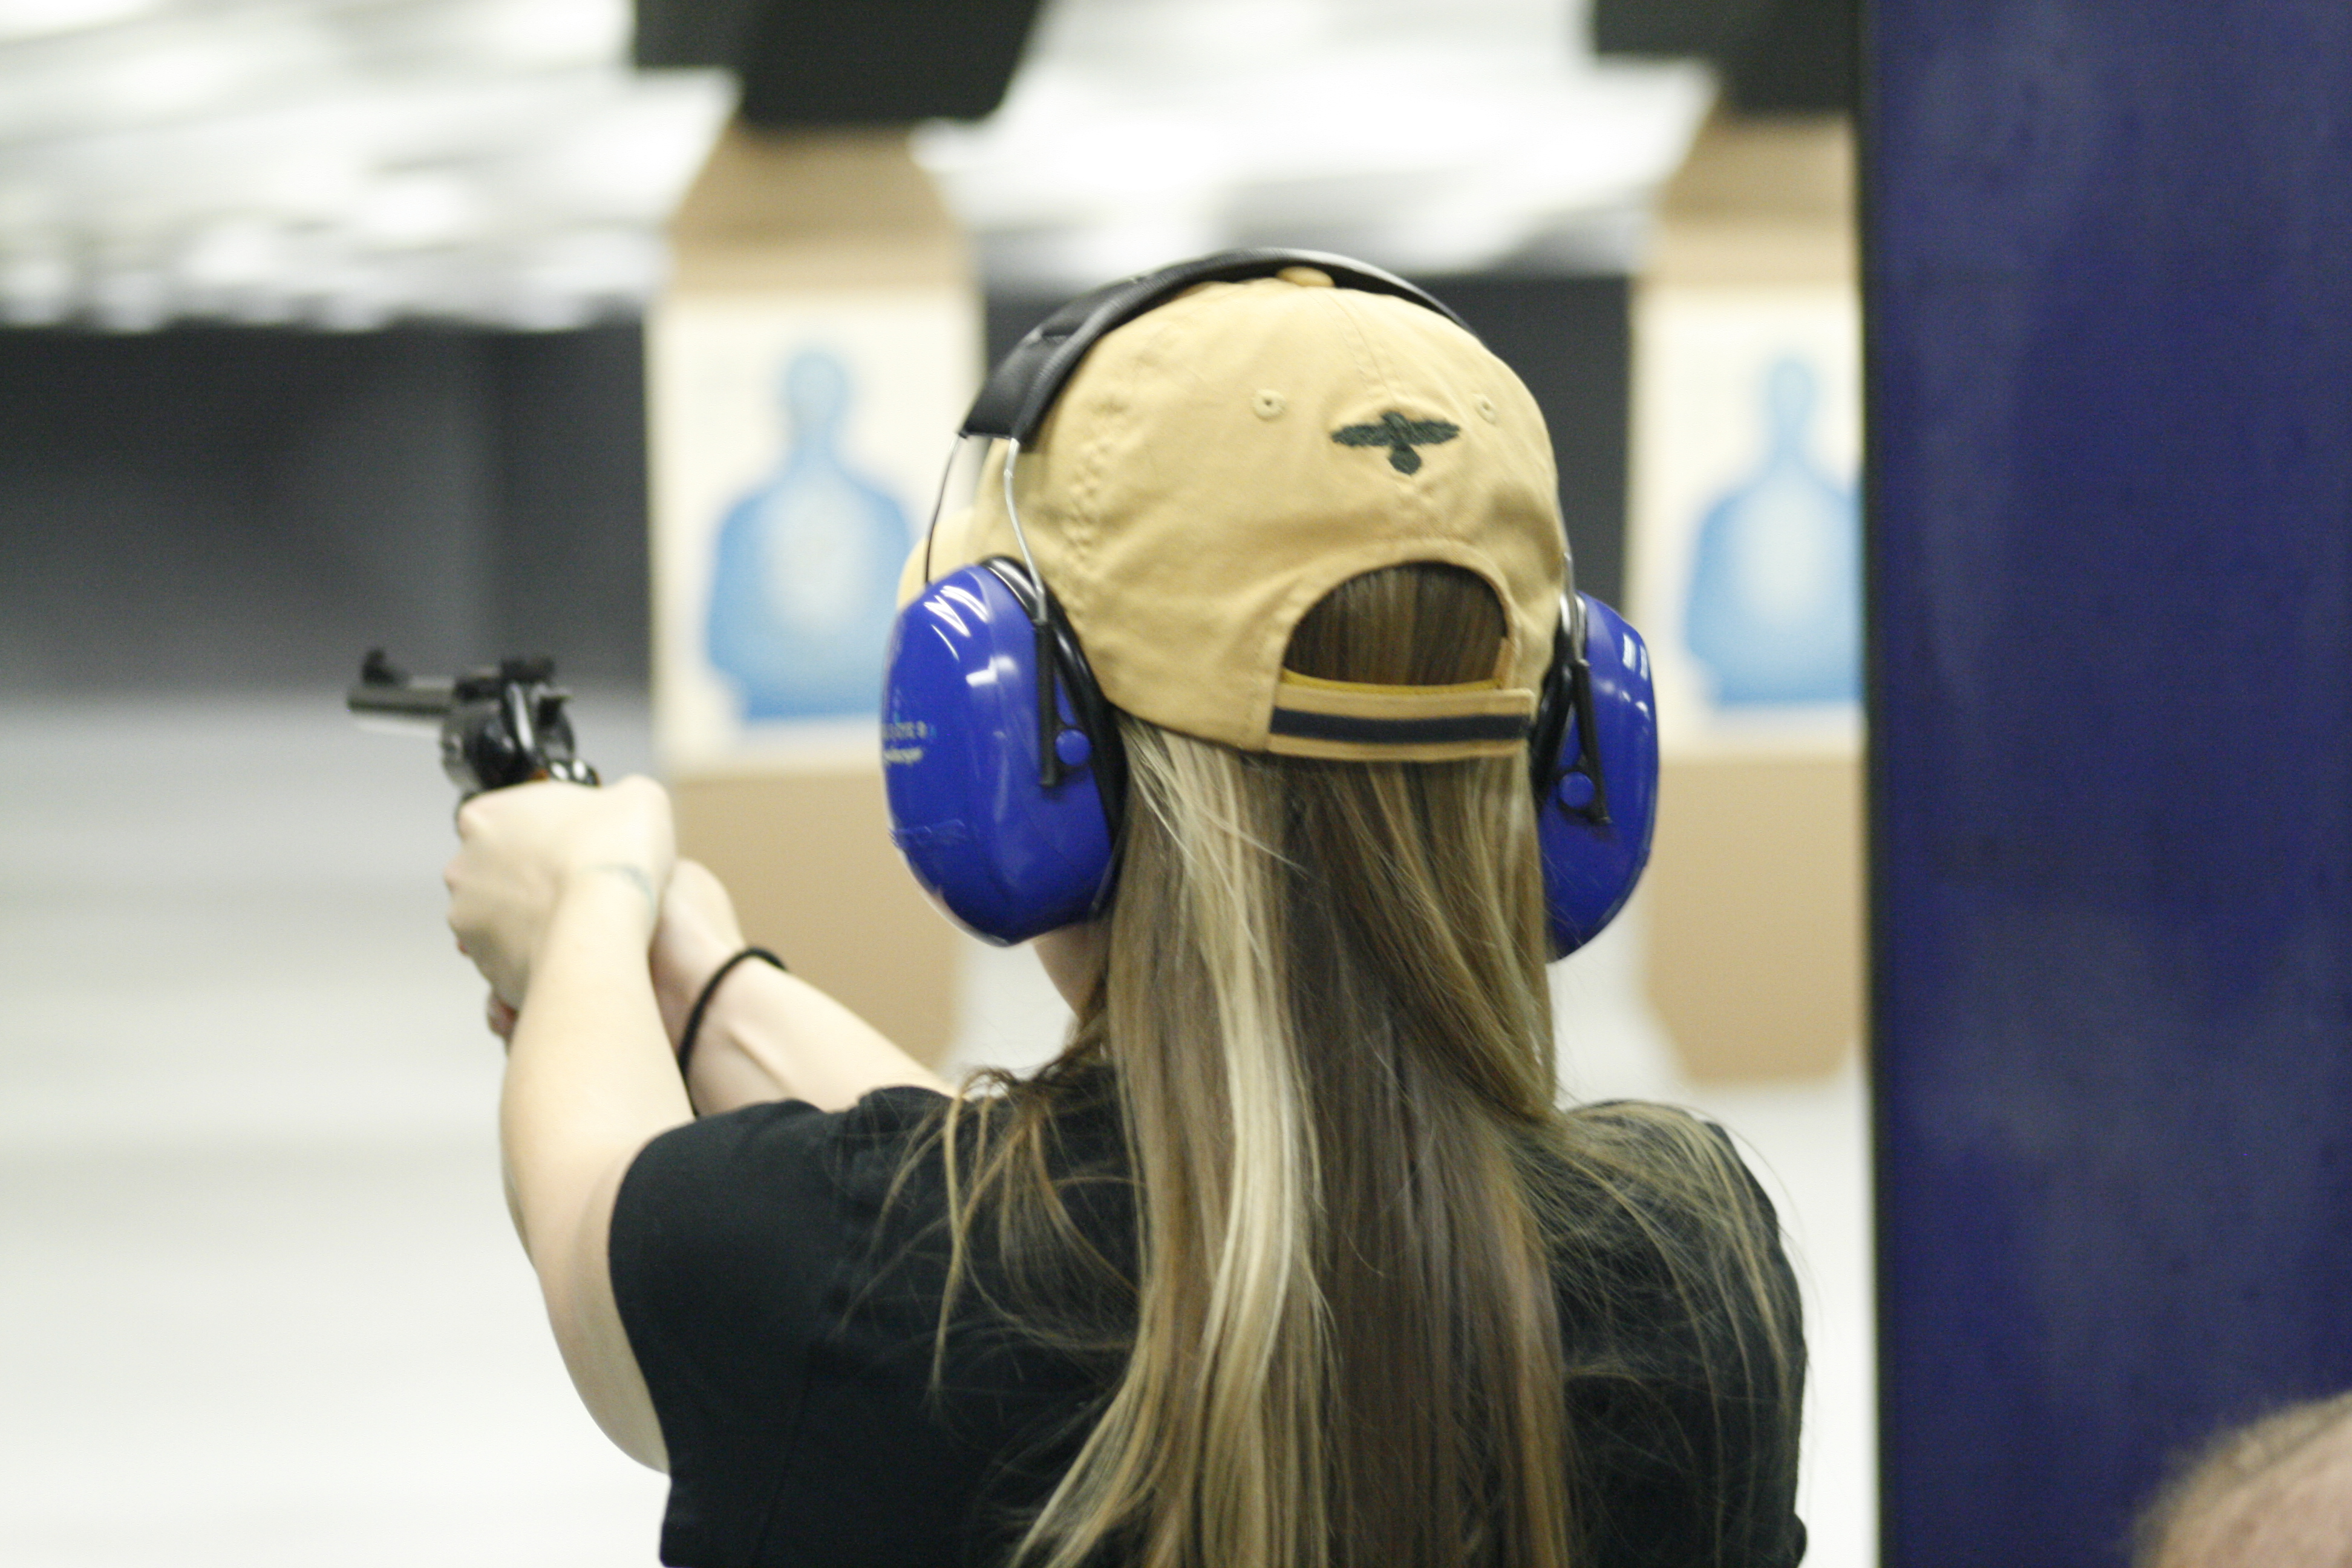 Contests & scholarships available through the NRA